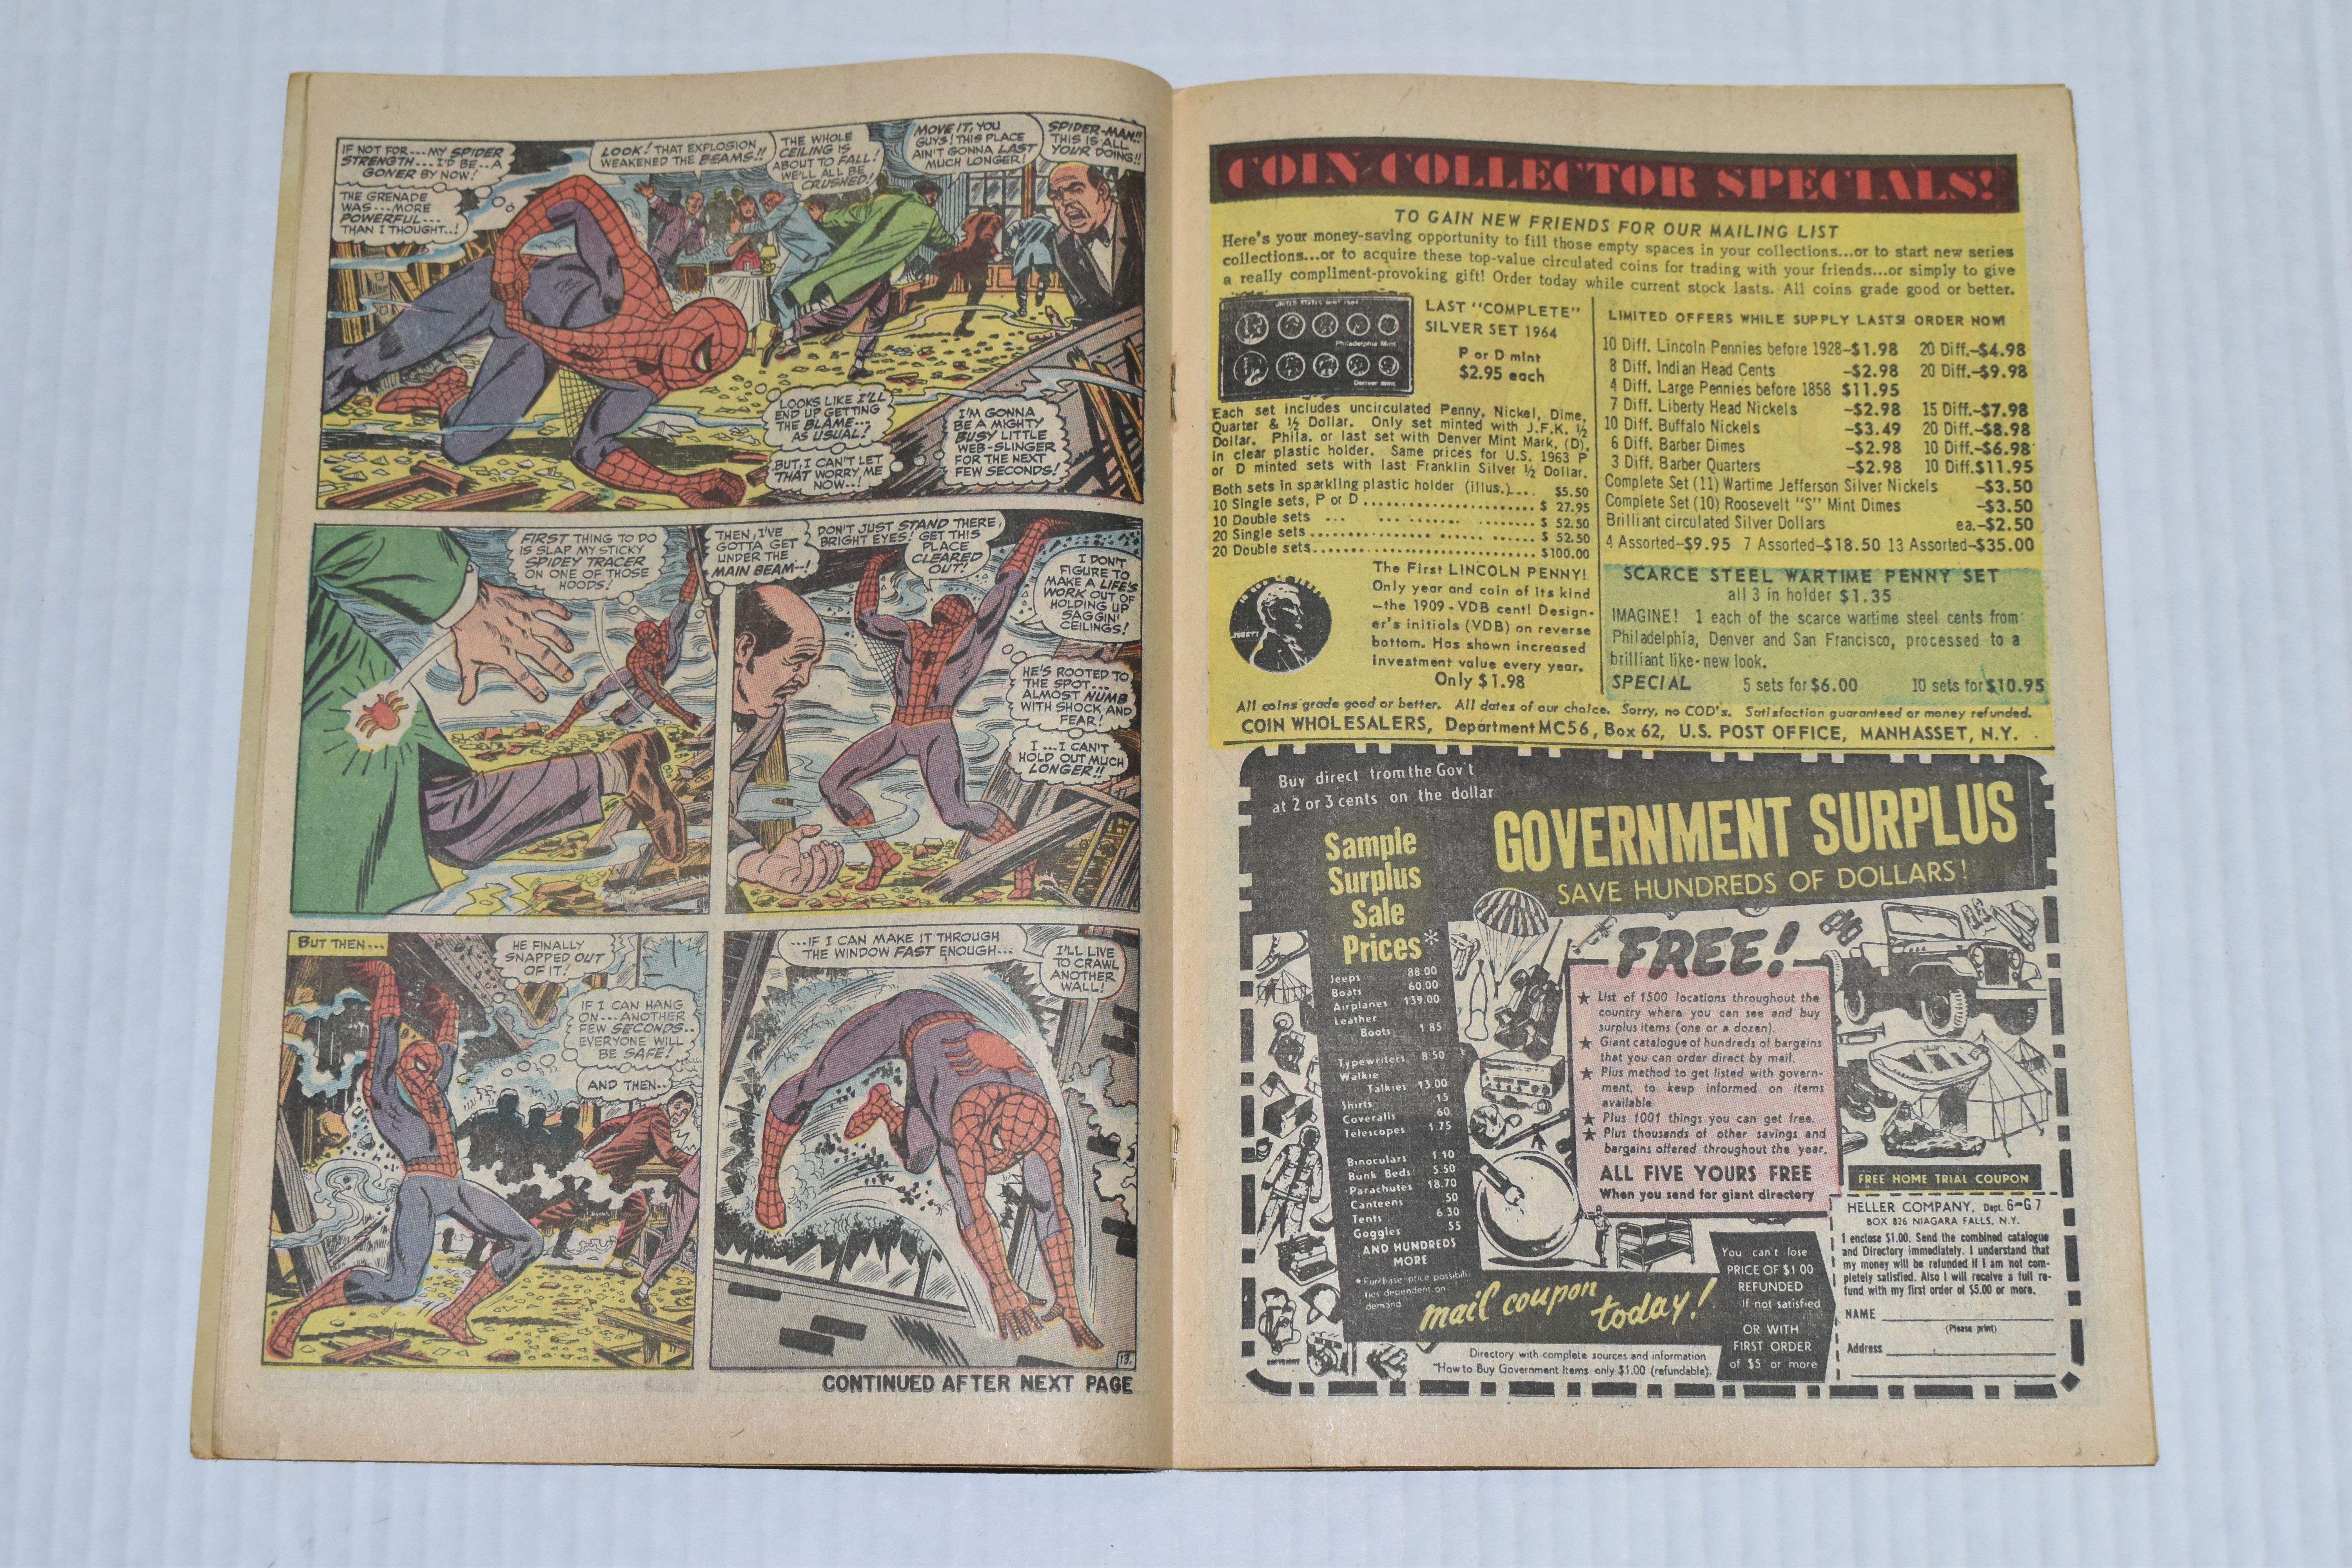 AMAING SPIDER-MAN NO. 51 MARVEL COMIC, second appearance of Kingpin, comic shows signs of wear, - Image 4 of 4